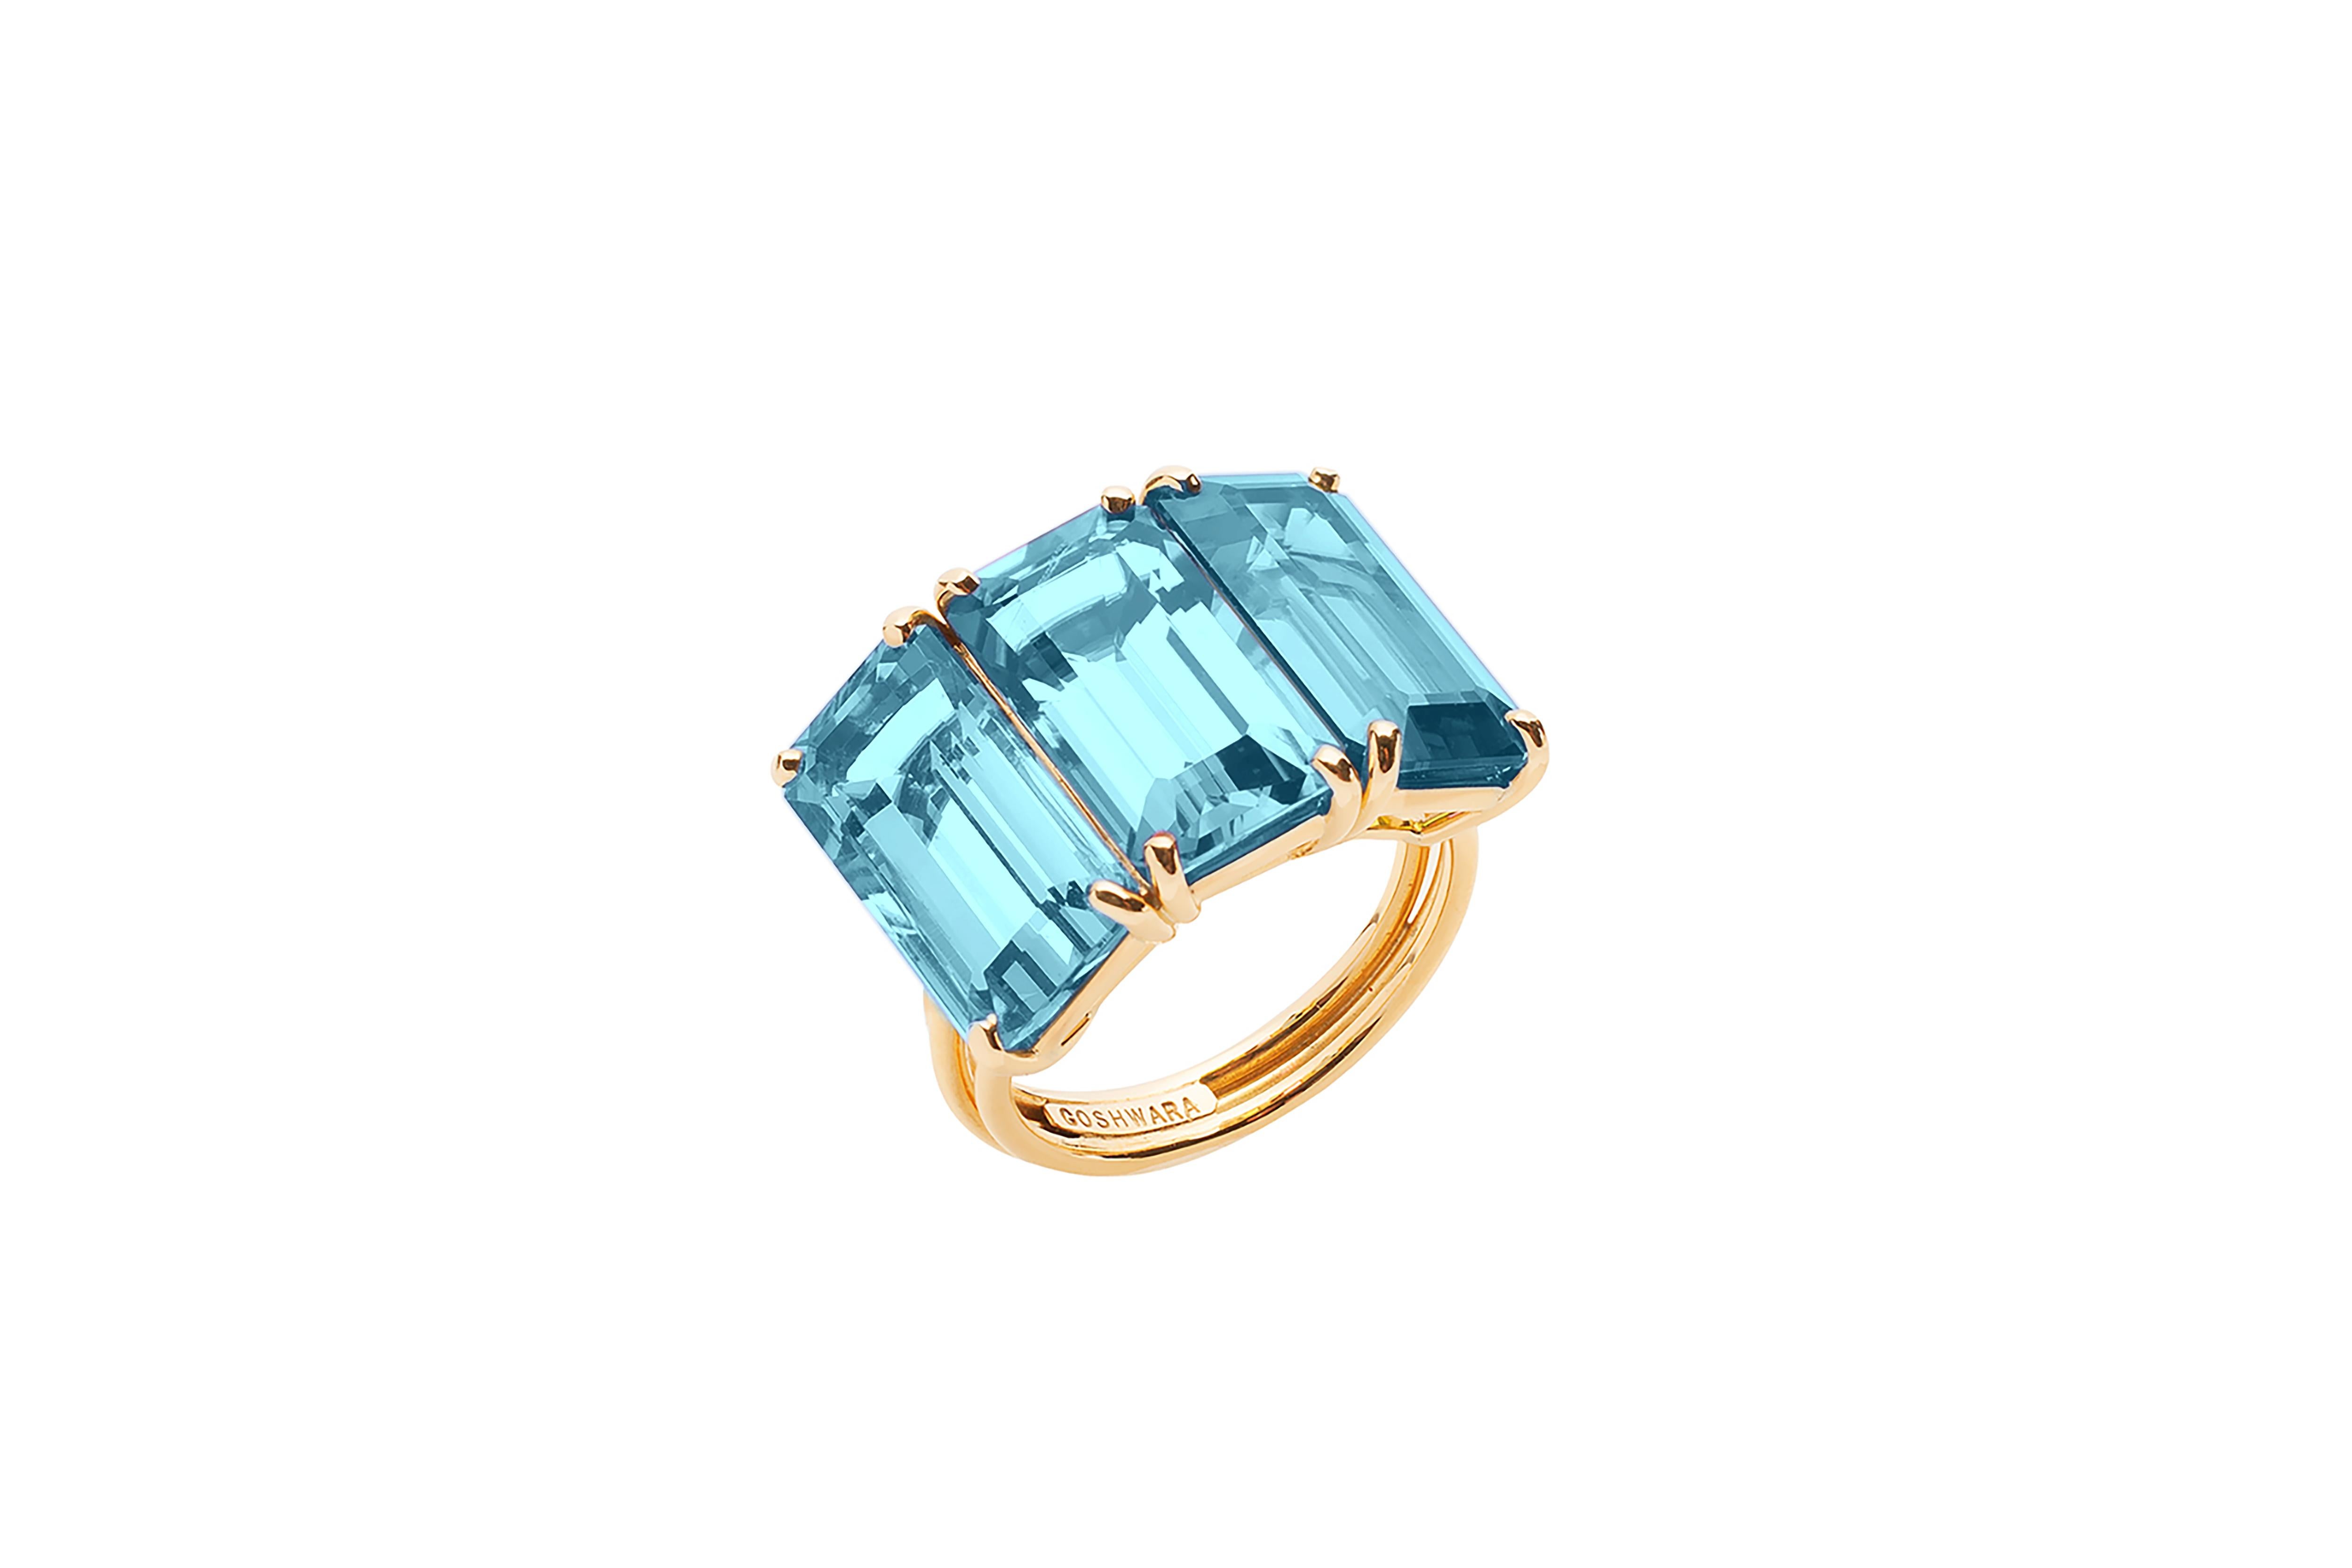 Blue Topaz 3 Stone Emerald Cut Ring in 18K Yellow Gold from 'Gossip' Collection
 Stone Size: 13 x 7 mm